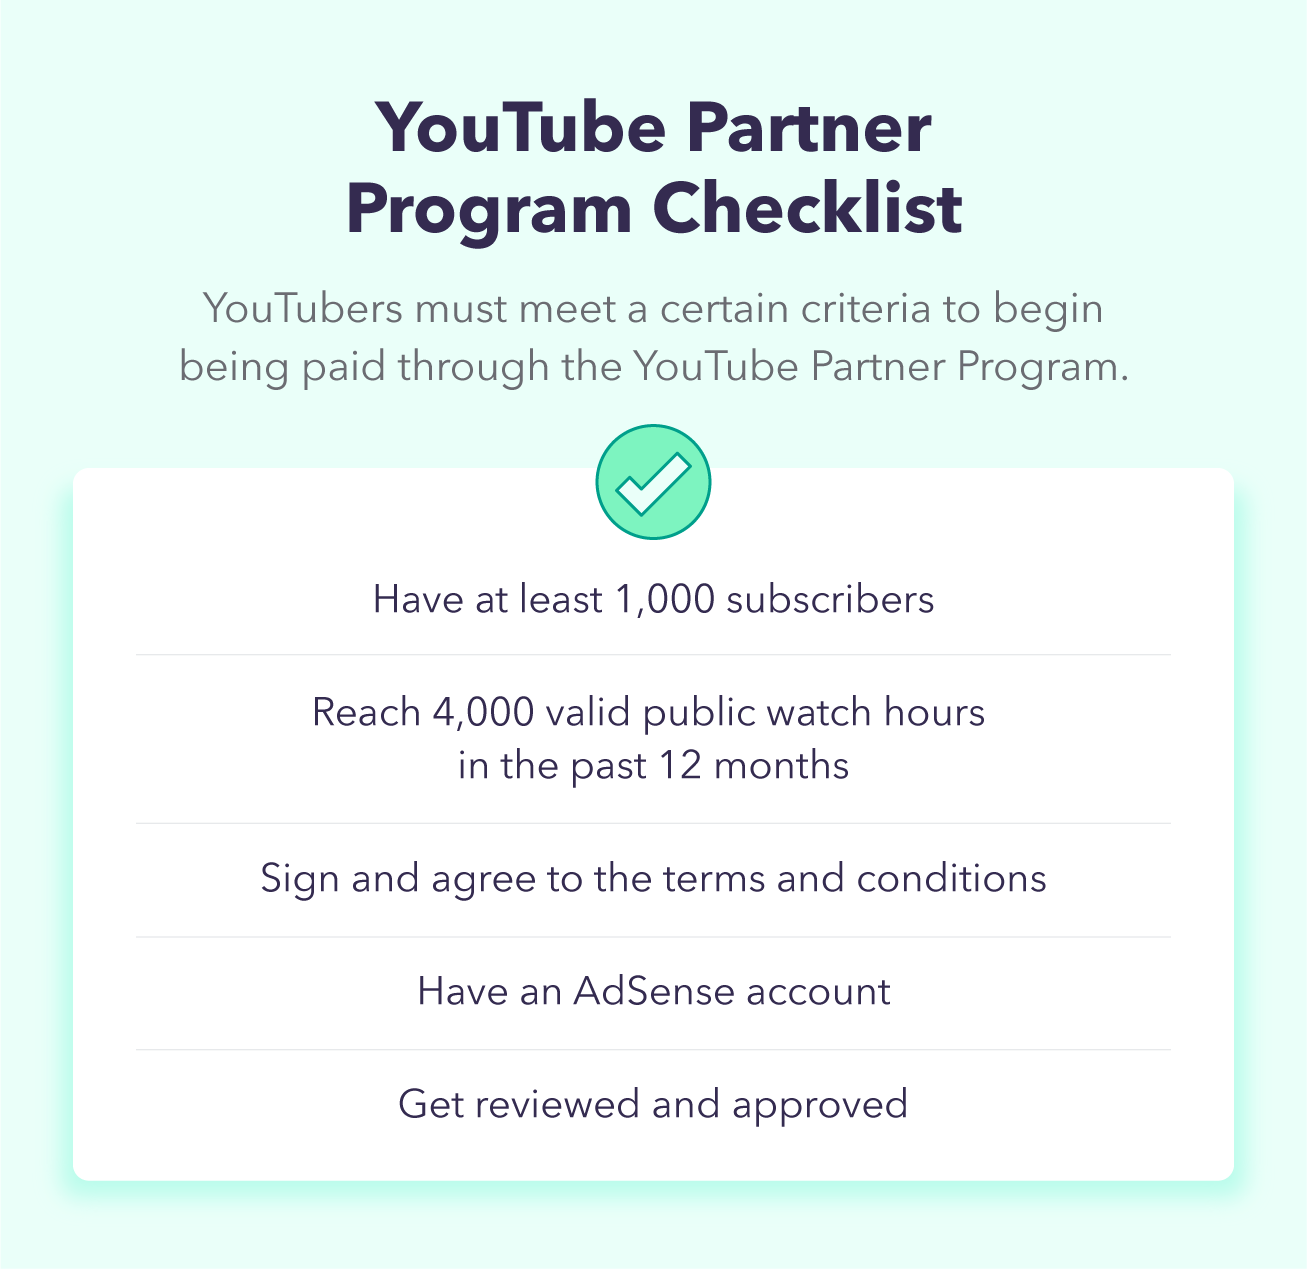 A checklist overviews the certain criteria YouTubers must meet to become a part of the YouTube Partner Program, which is how YouTubers are paid.